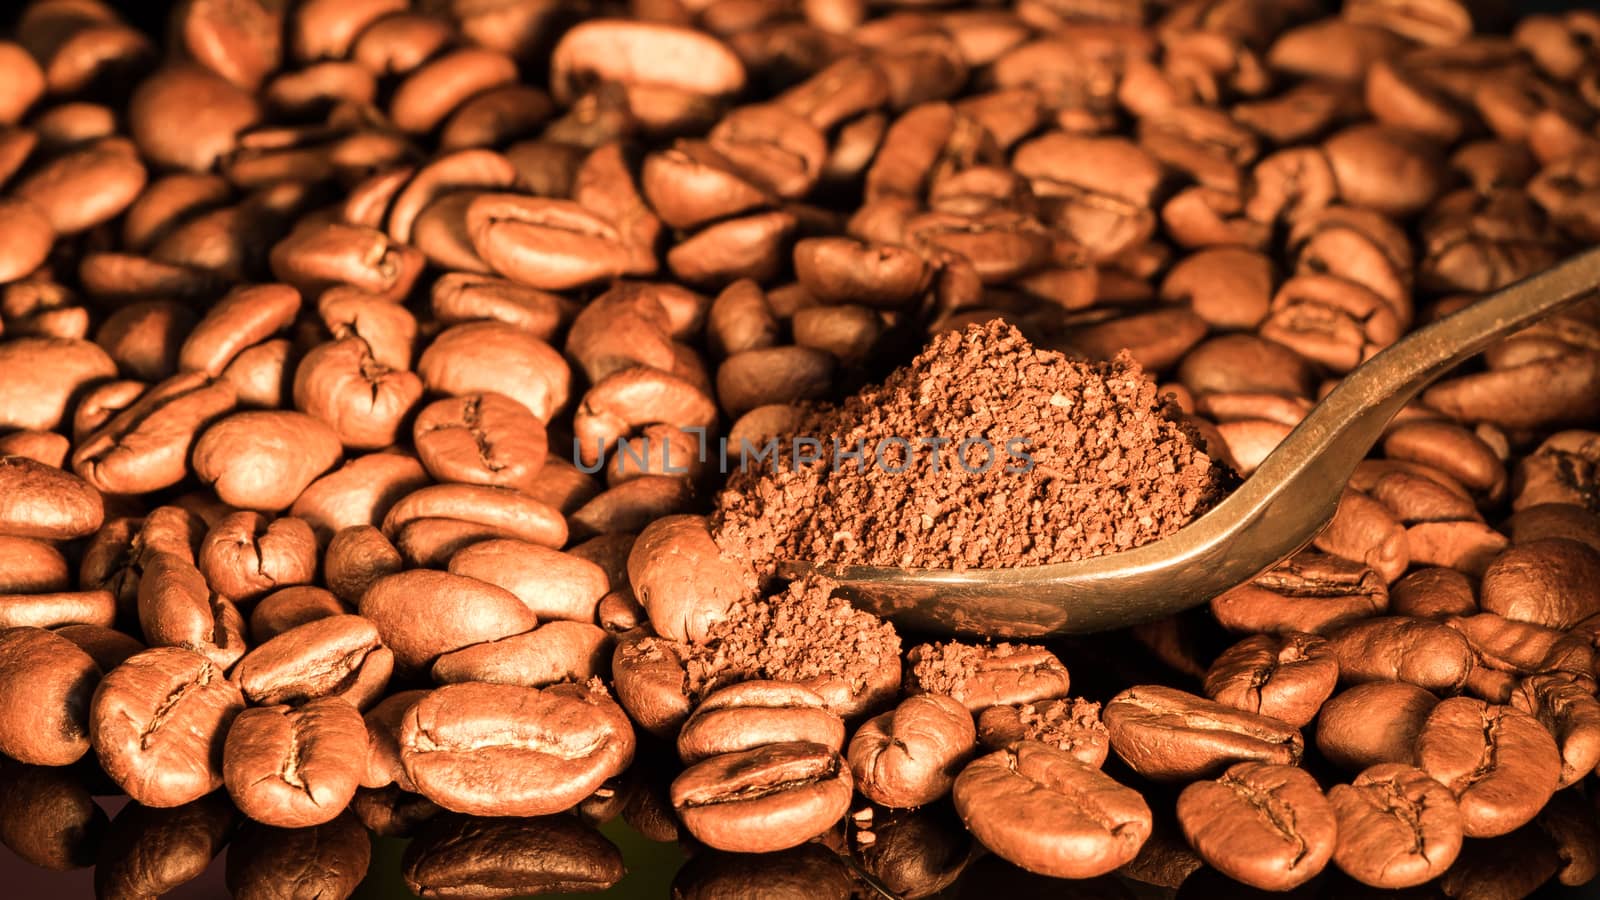 Coffee beans close-up with a spoon of ground coffee on a mirror background.